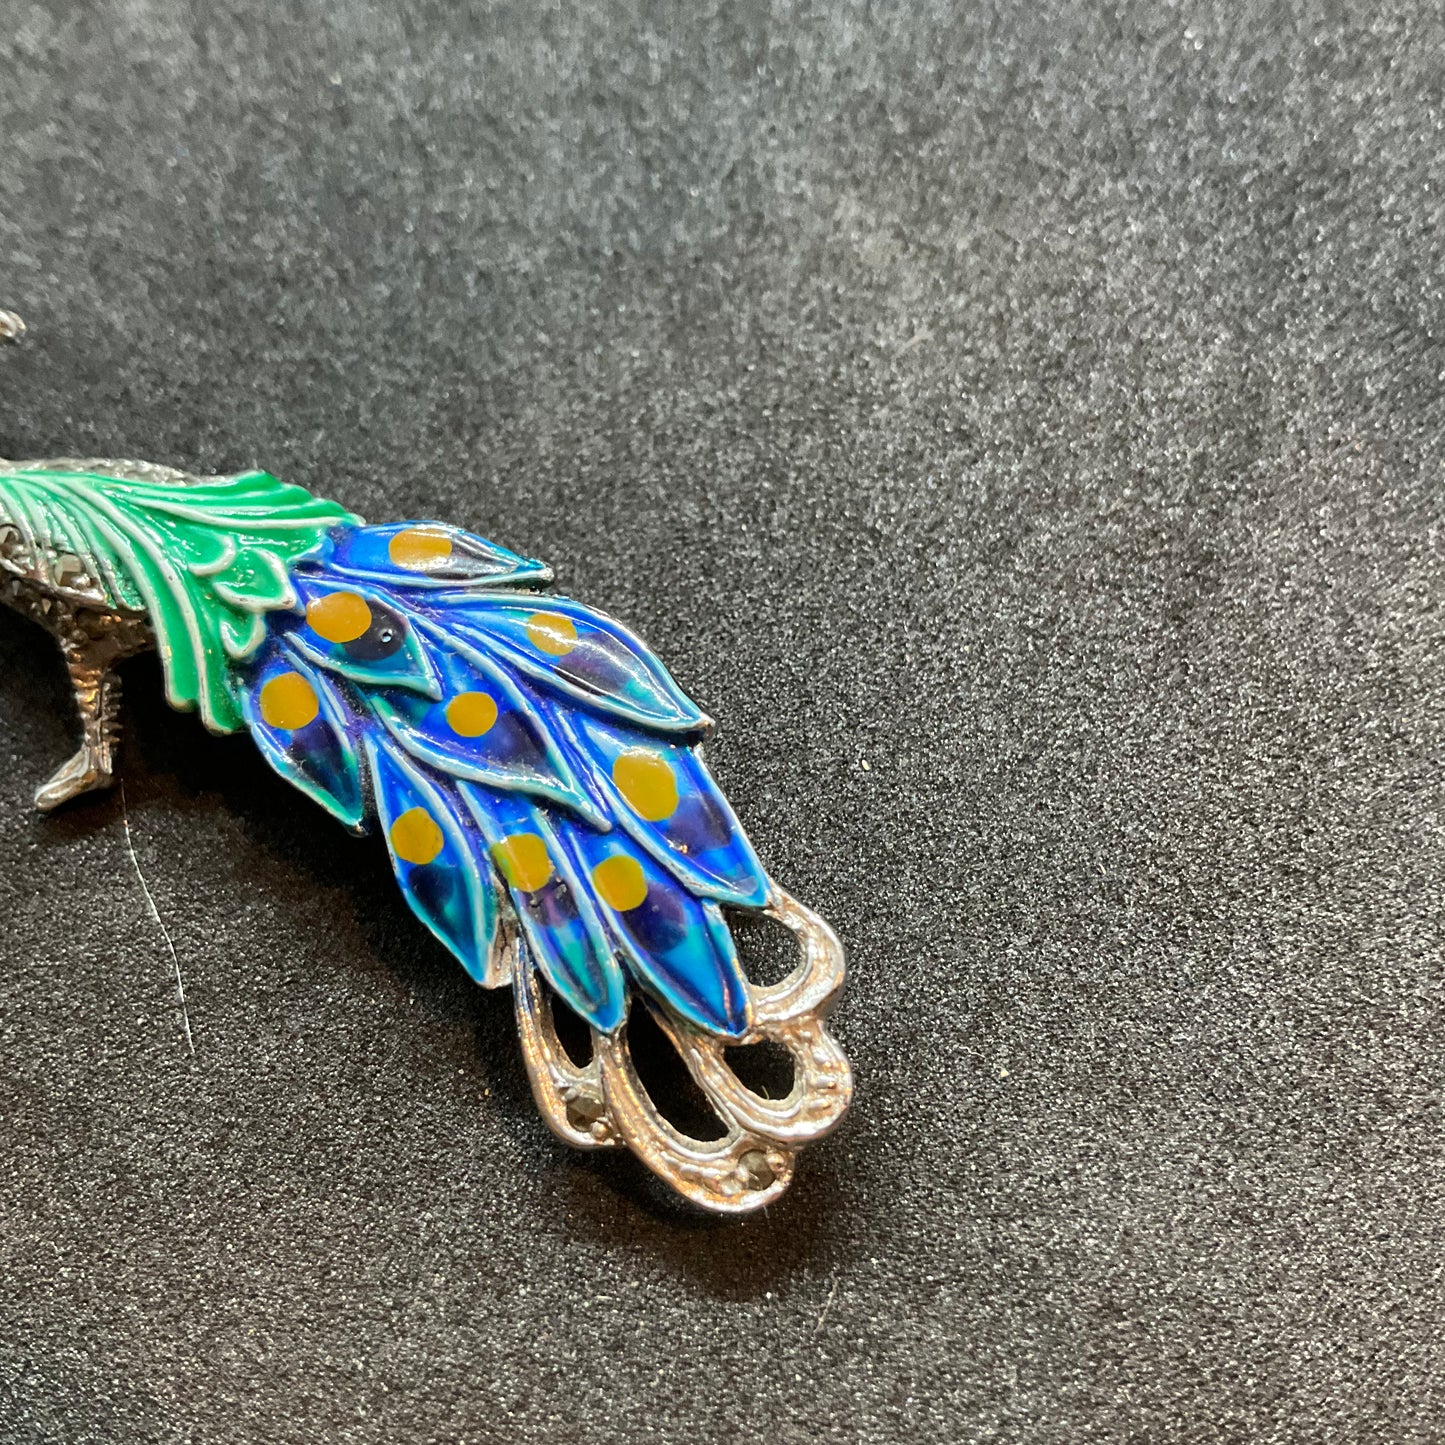 Vintage 1940s Bohemian Enamel and Marcasite Colourful Peacock Brooch